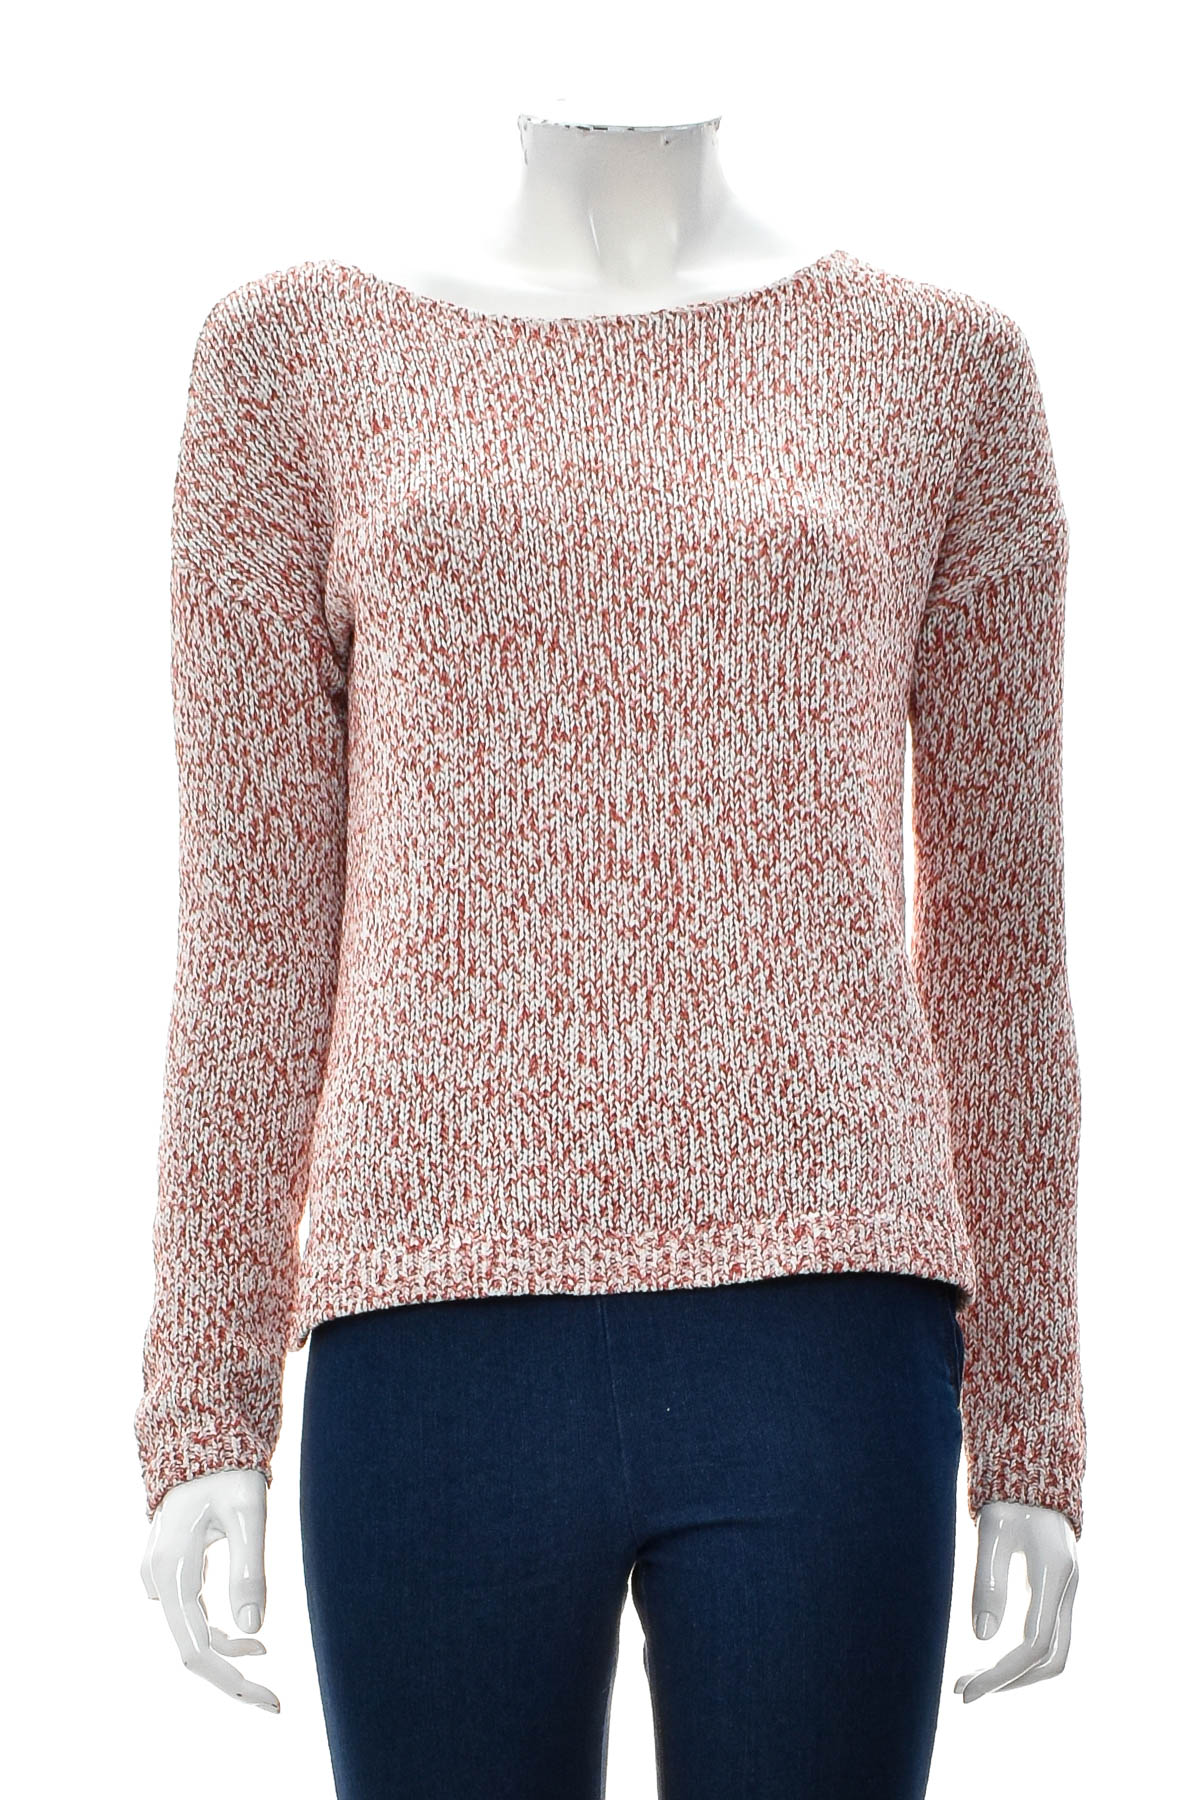 Women's sweater - S.Oliver - 0